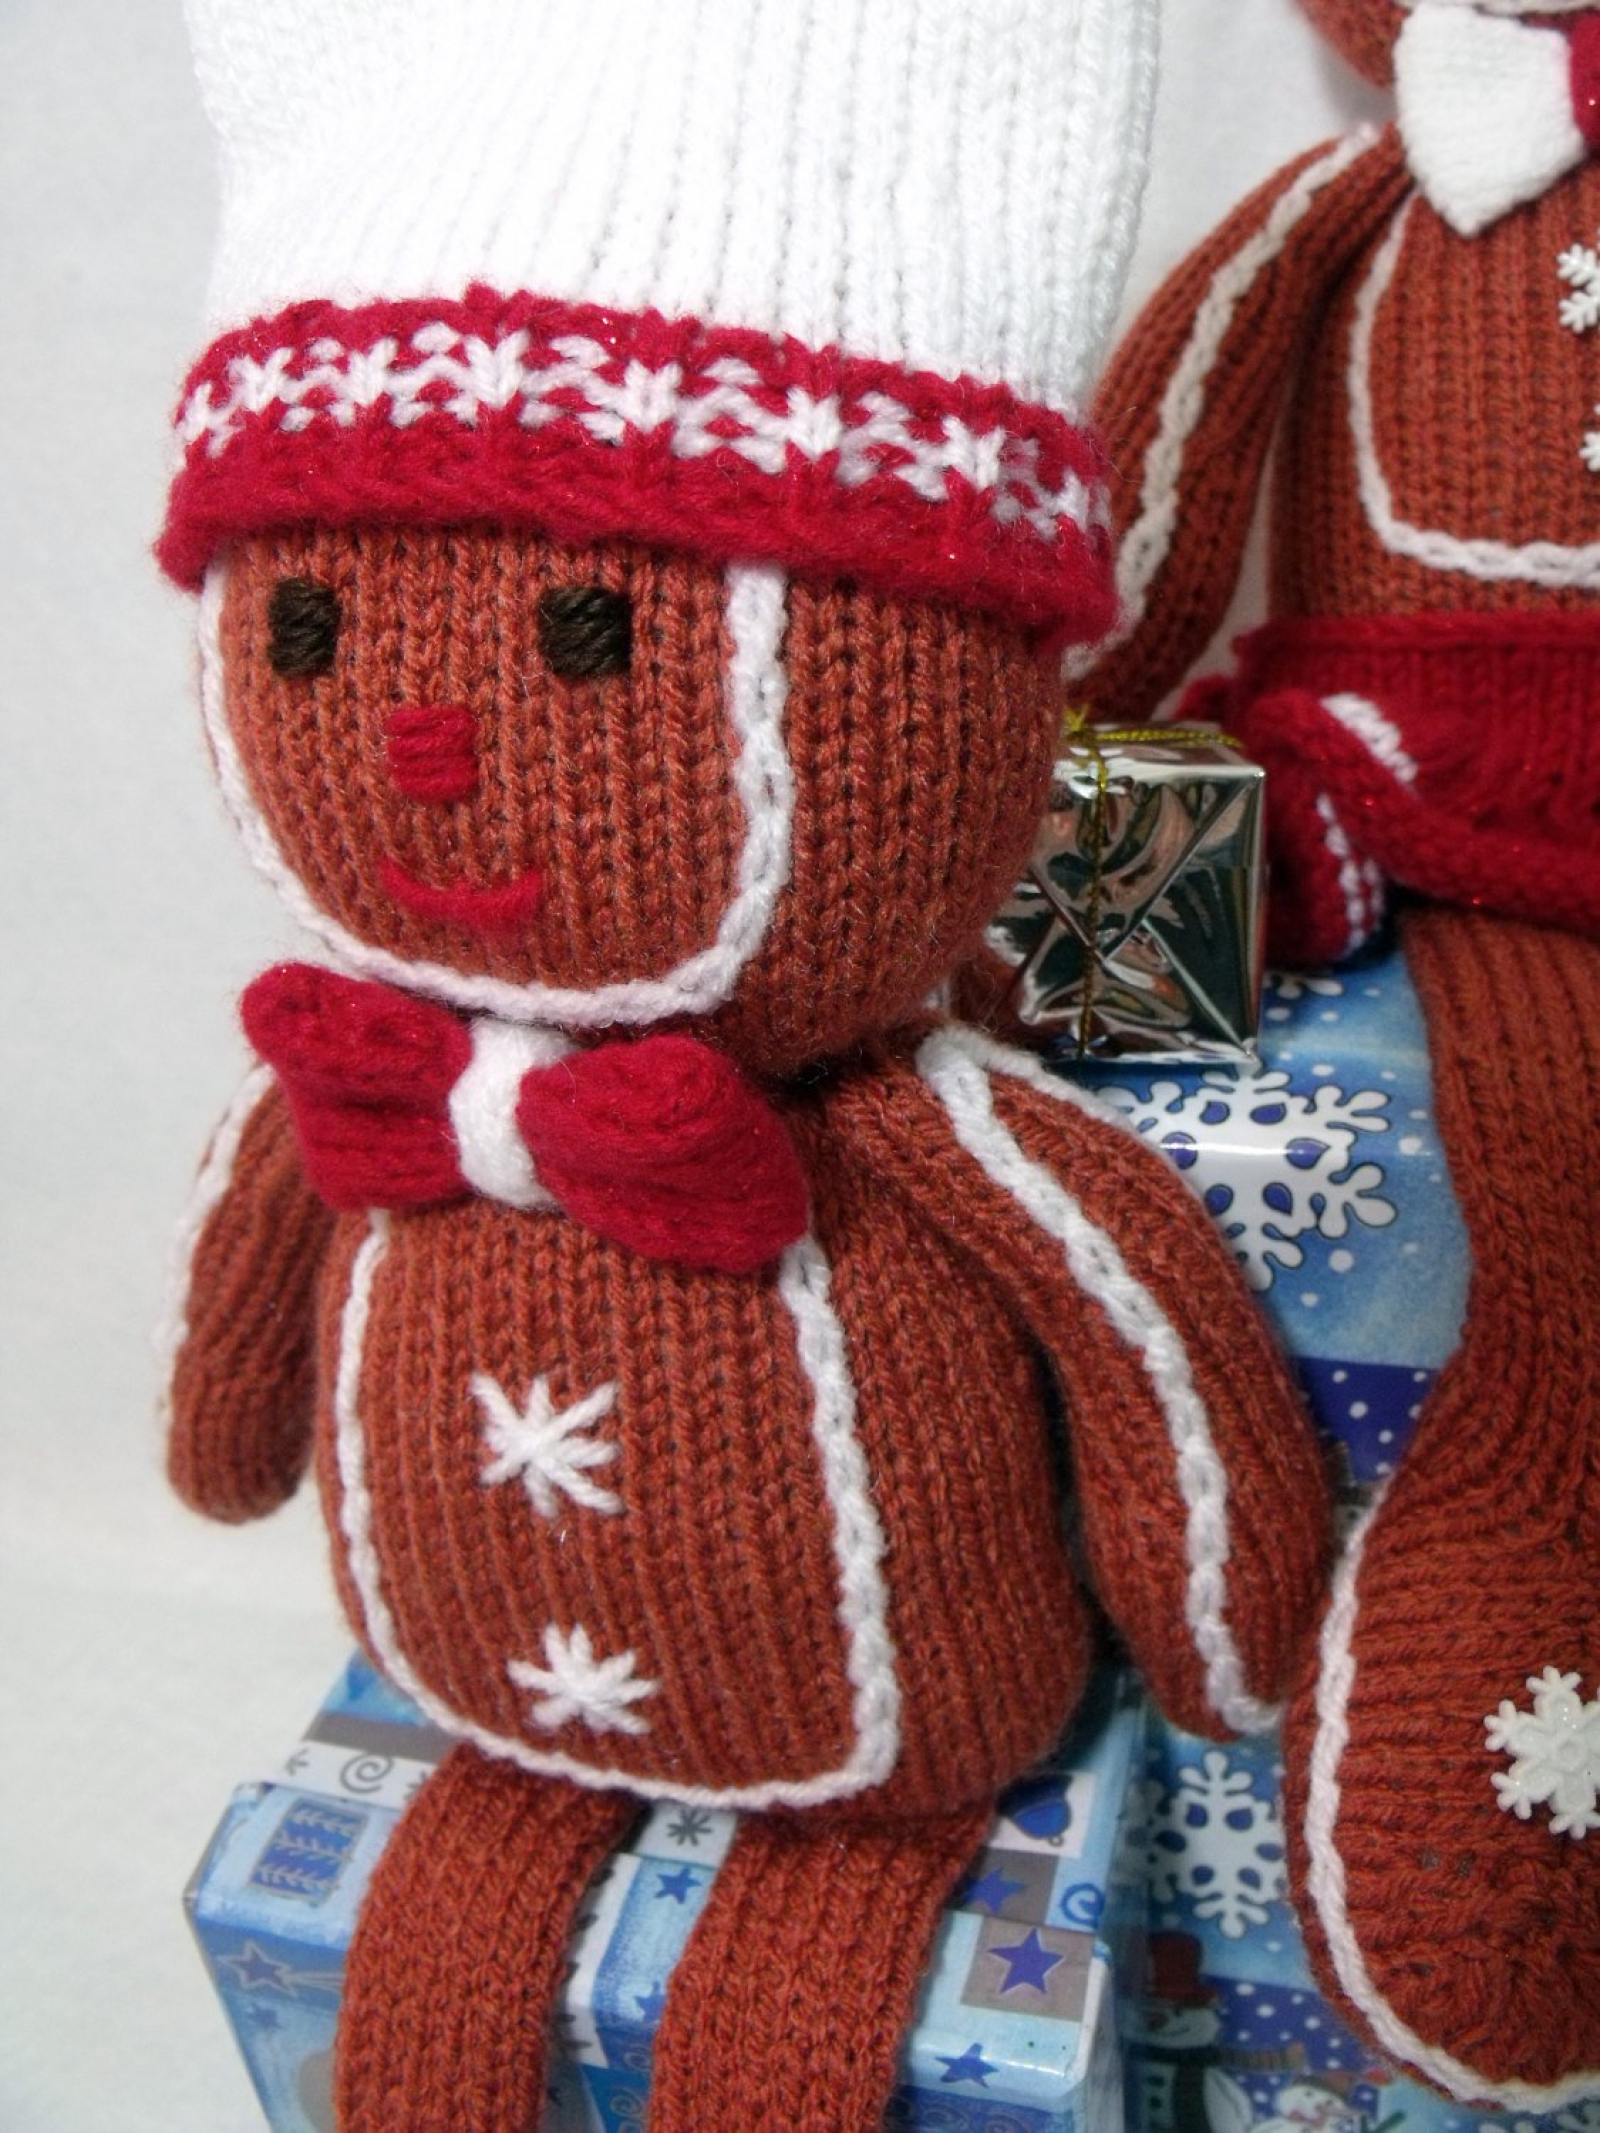 Toy doll knitting pattern. Gingerbread people. Christmas decoration